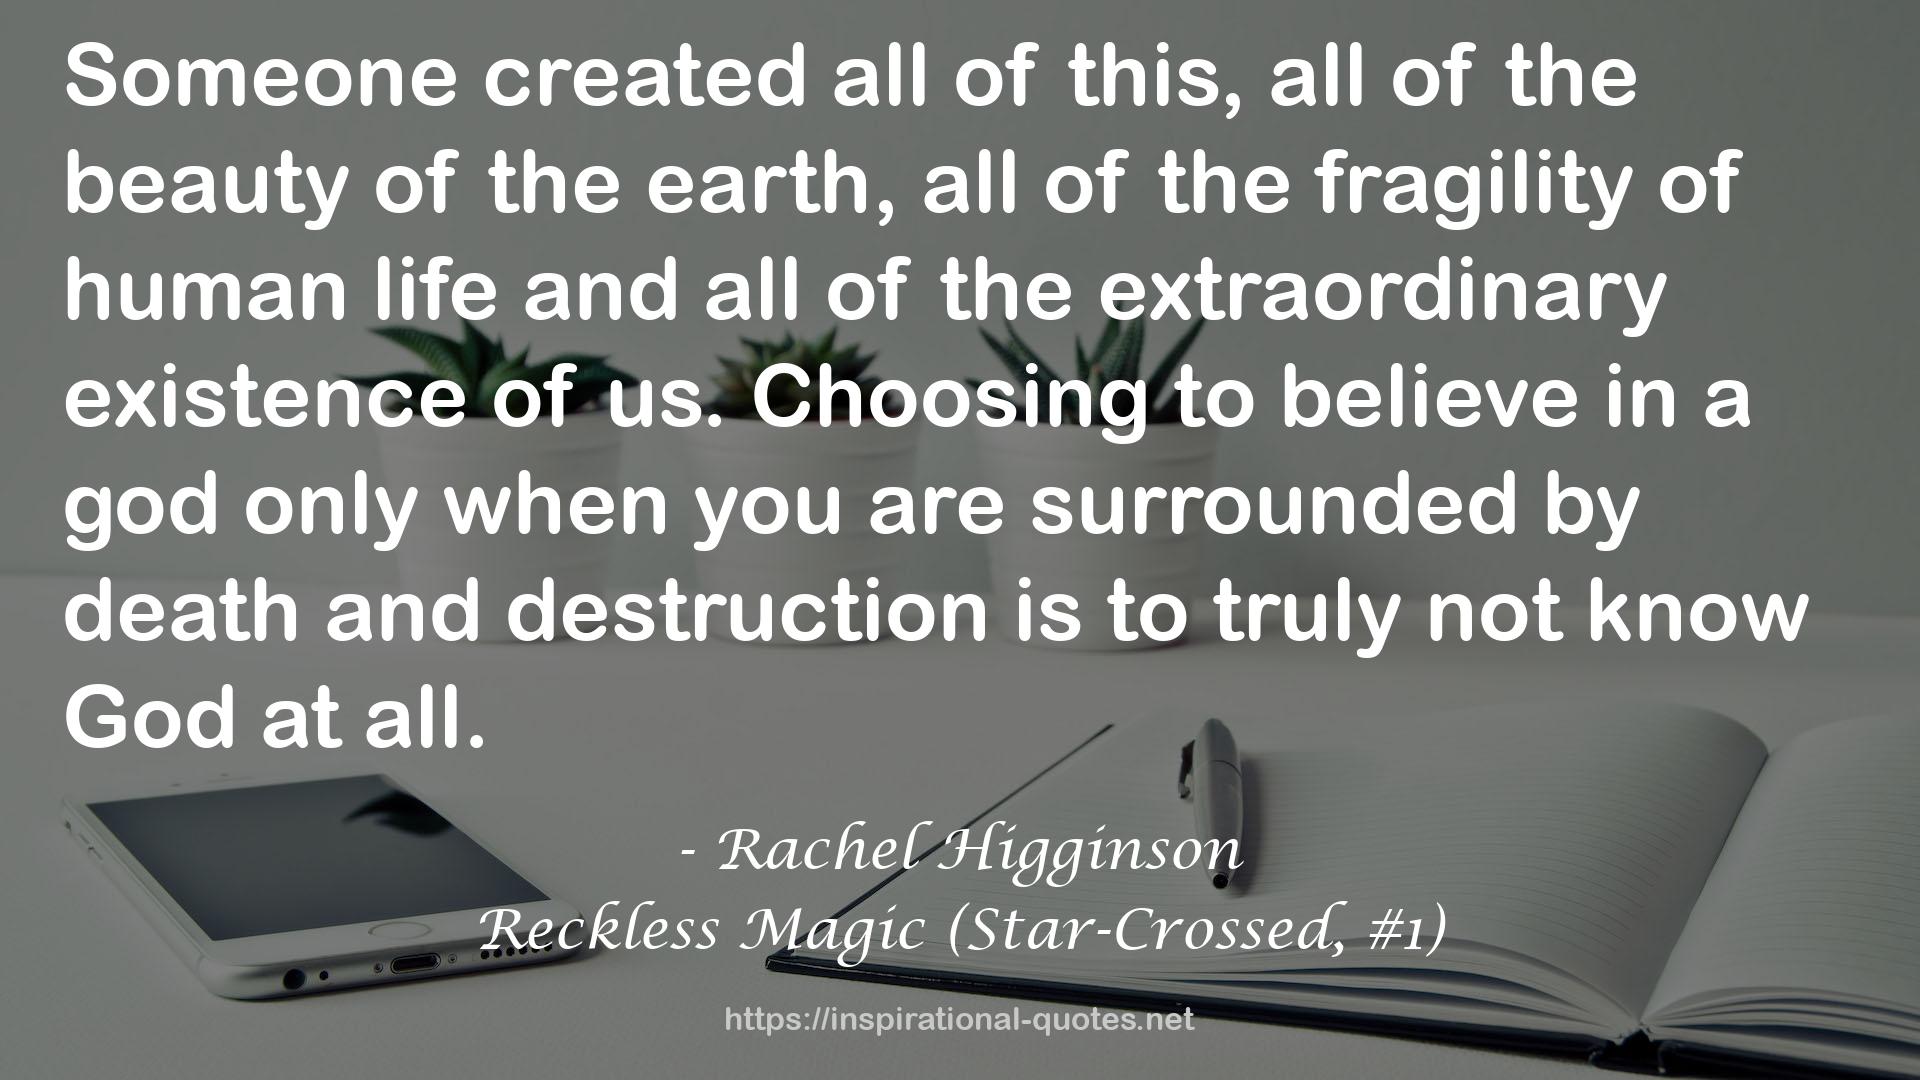 Reckless Magic (Star-Crossed, #1) QUOTES